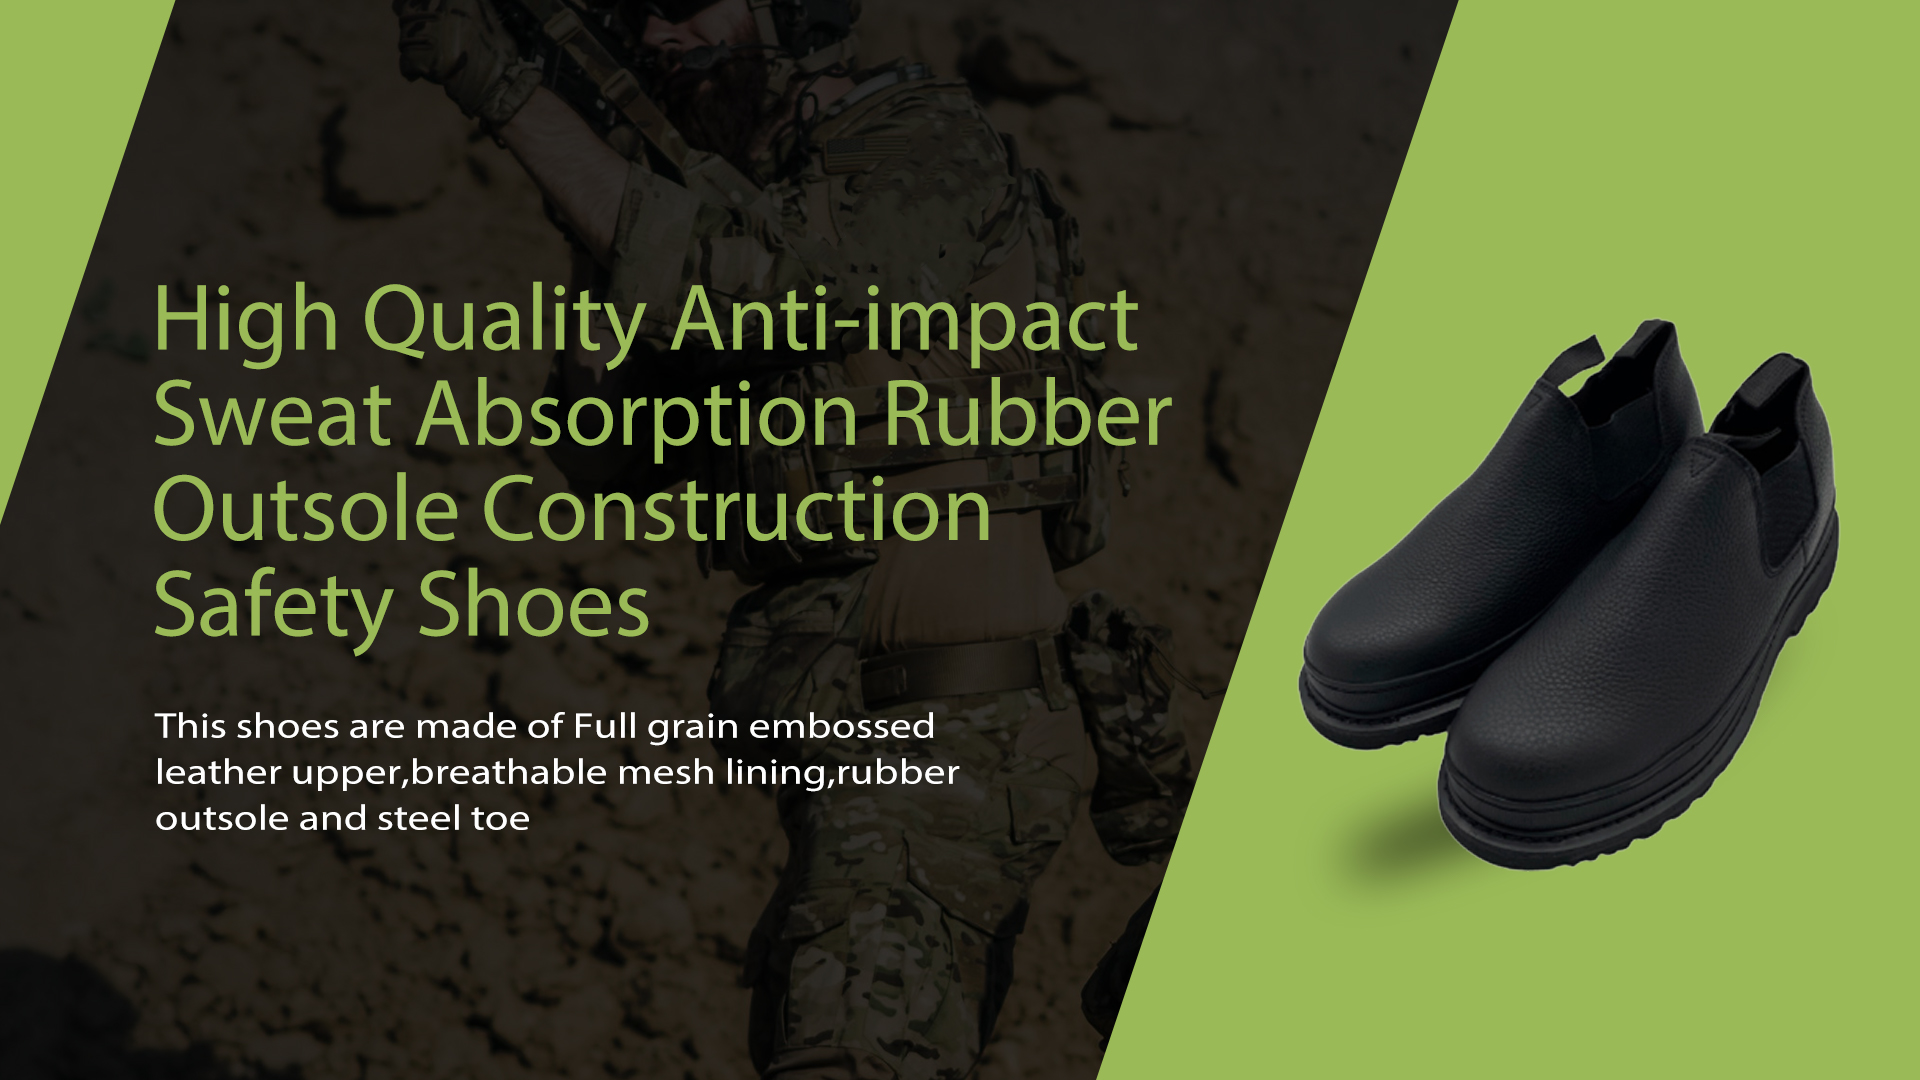 Mataas na Kalidad na Anti-impact Sweat Absorption Rubber Outsole Construction Safety Shoes